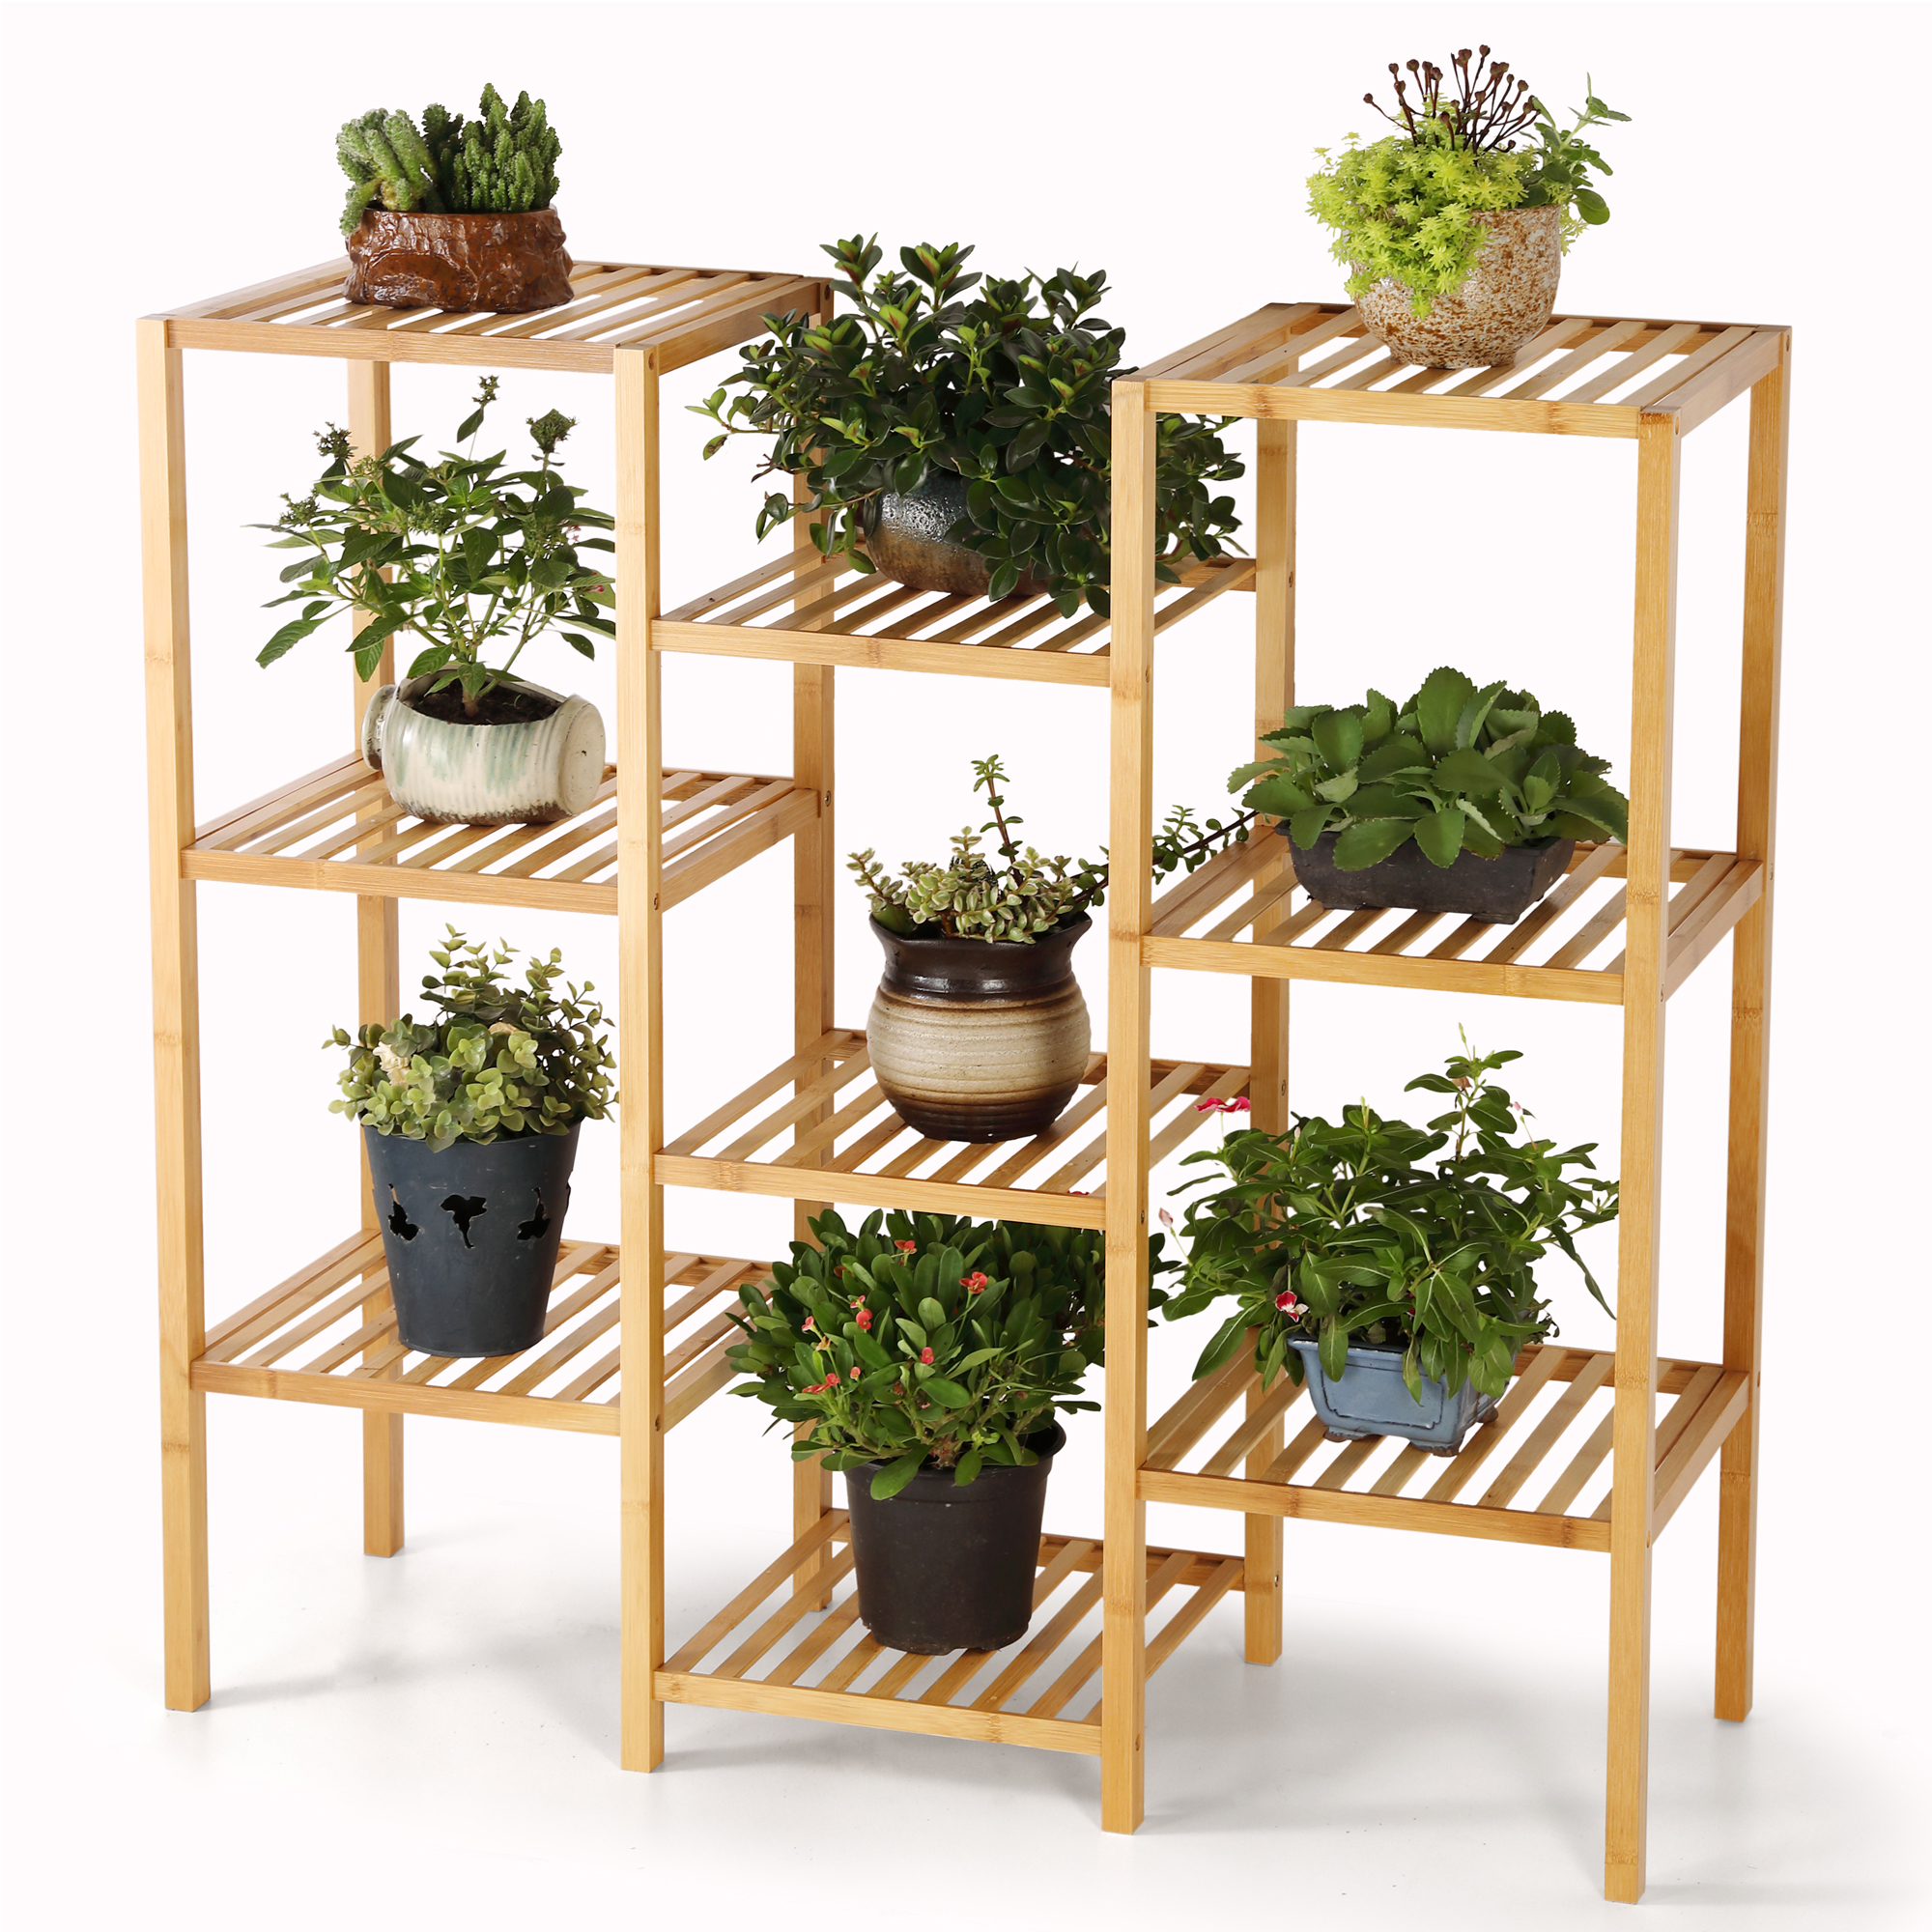 3 Tiers Plant Rack Plant Holder Flower Rack Indoor Outdoor Plant Display Storage Shelves for Patio Garden Balcony Yard HYNAWIN Wood Plant Stand 